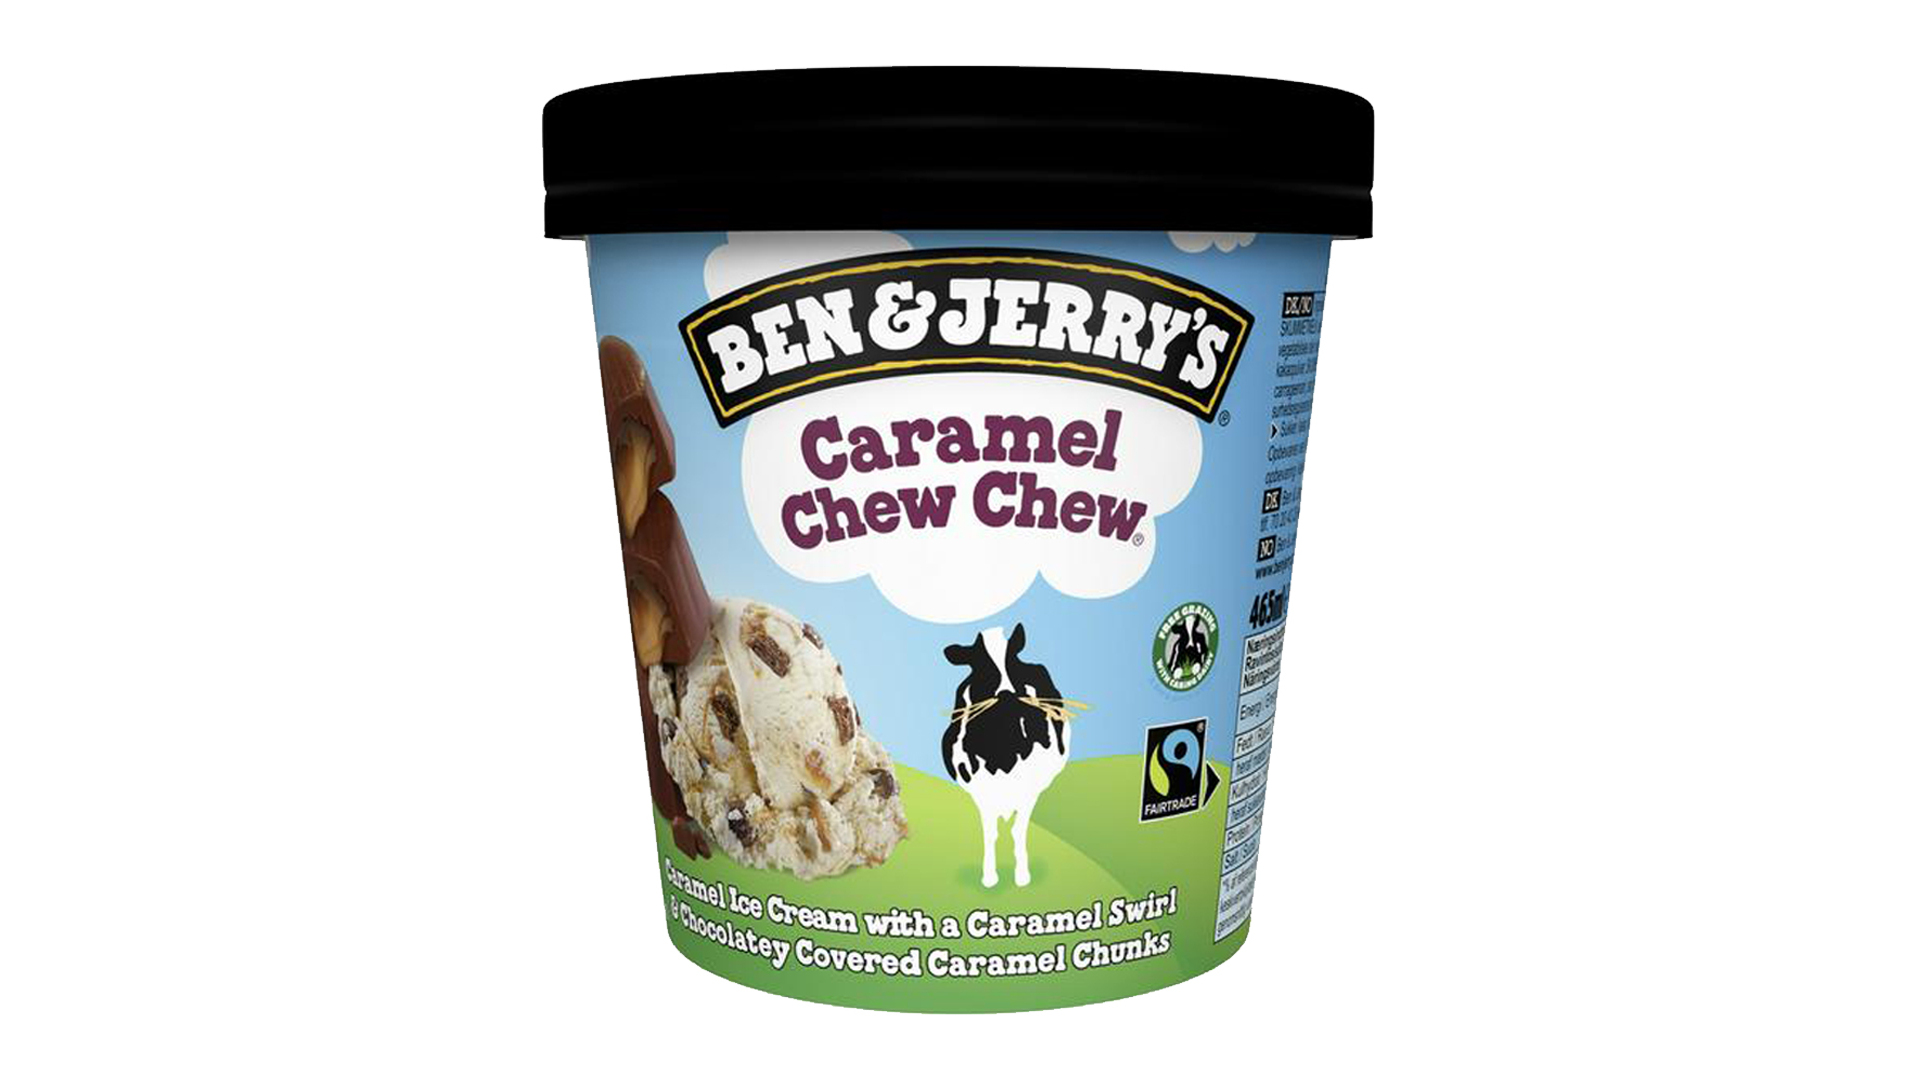 Ben & Jerry's Caramel Chew Chew 500ml - Best Collection in Woodford Green IG8